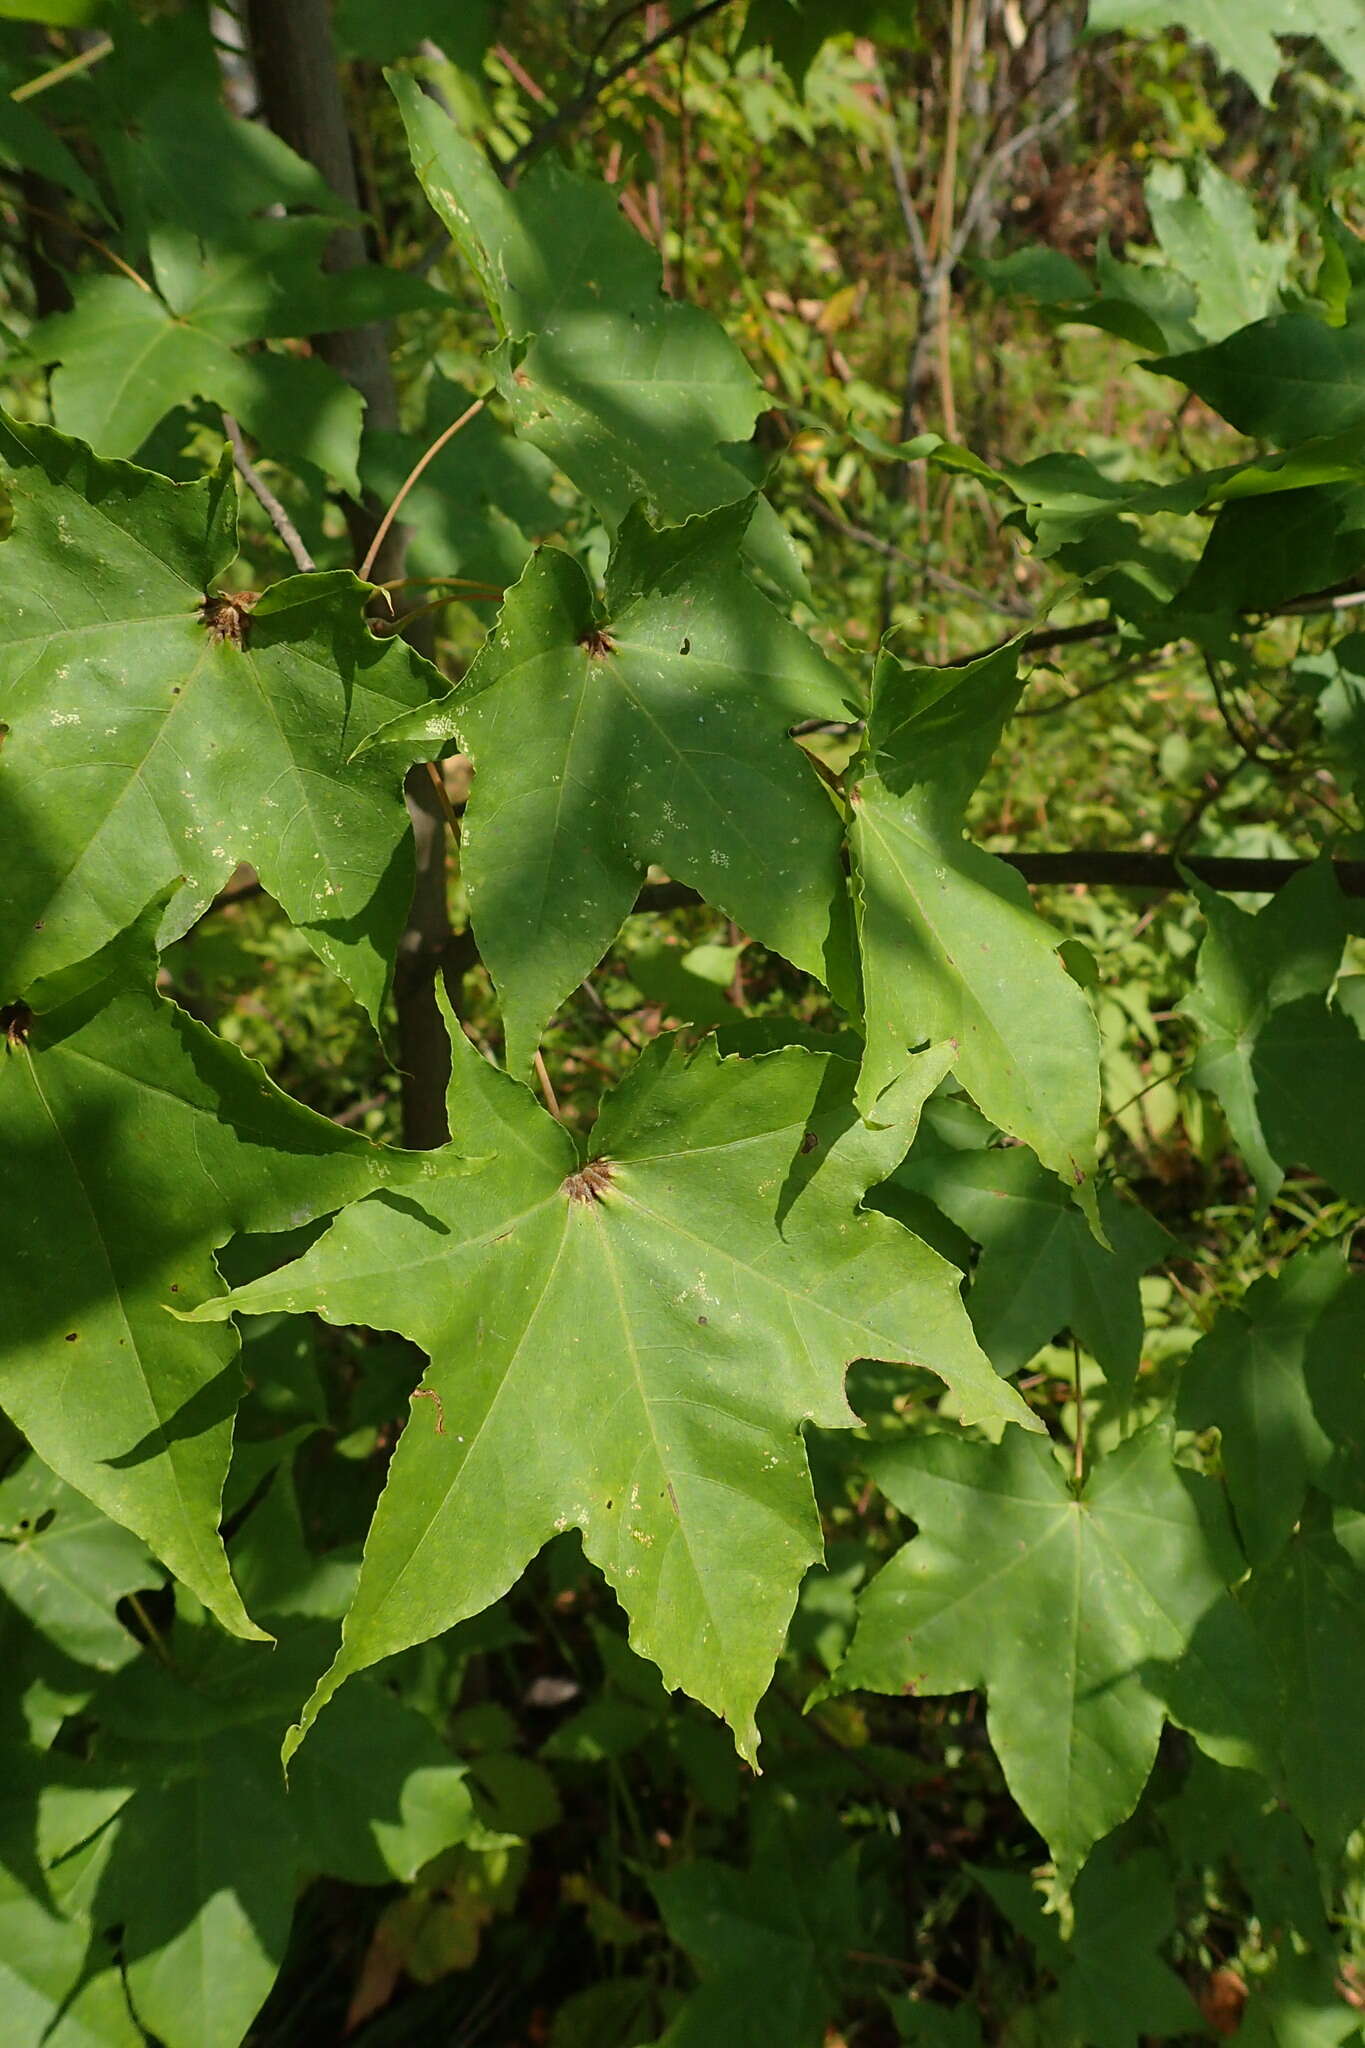 Image of Acer pictum subsp. mayrii (Schwer.) H. Ohashi